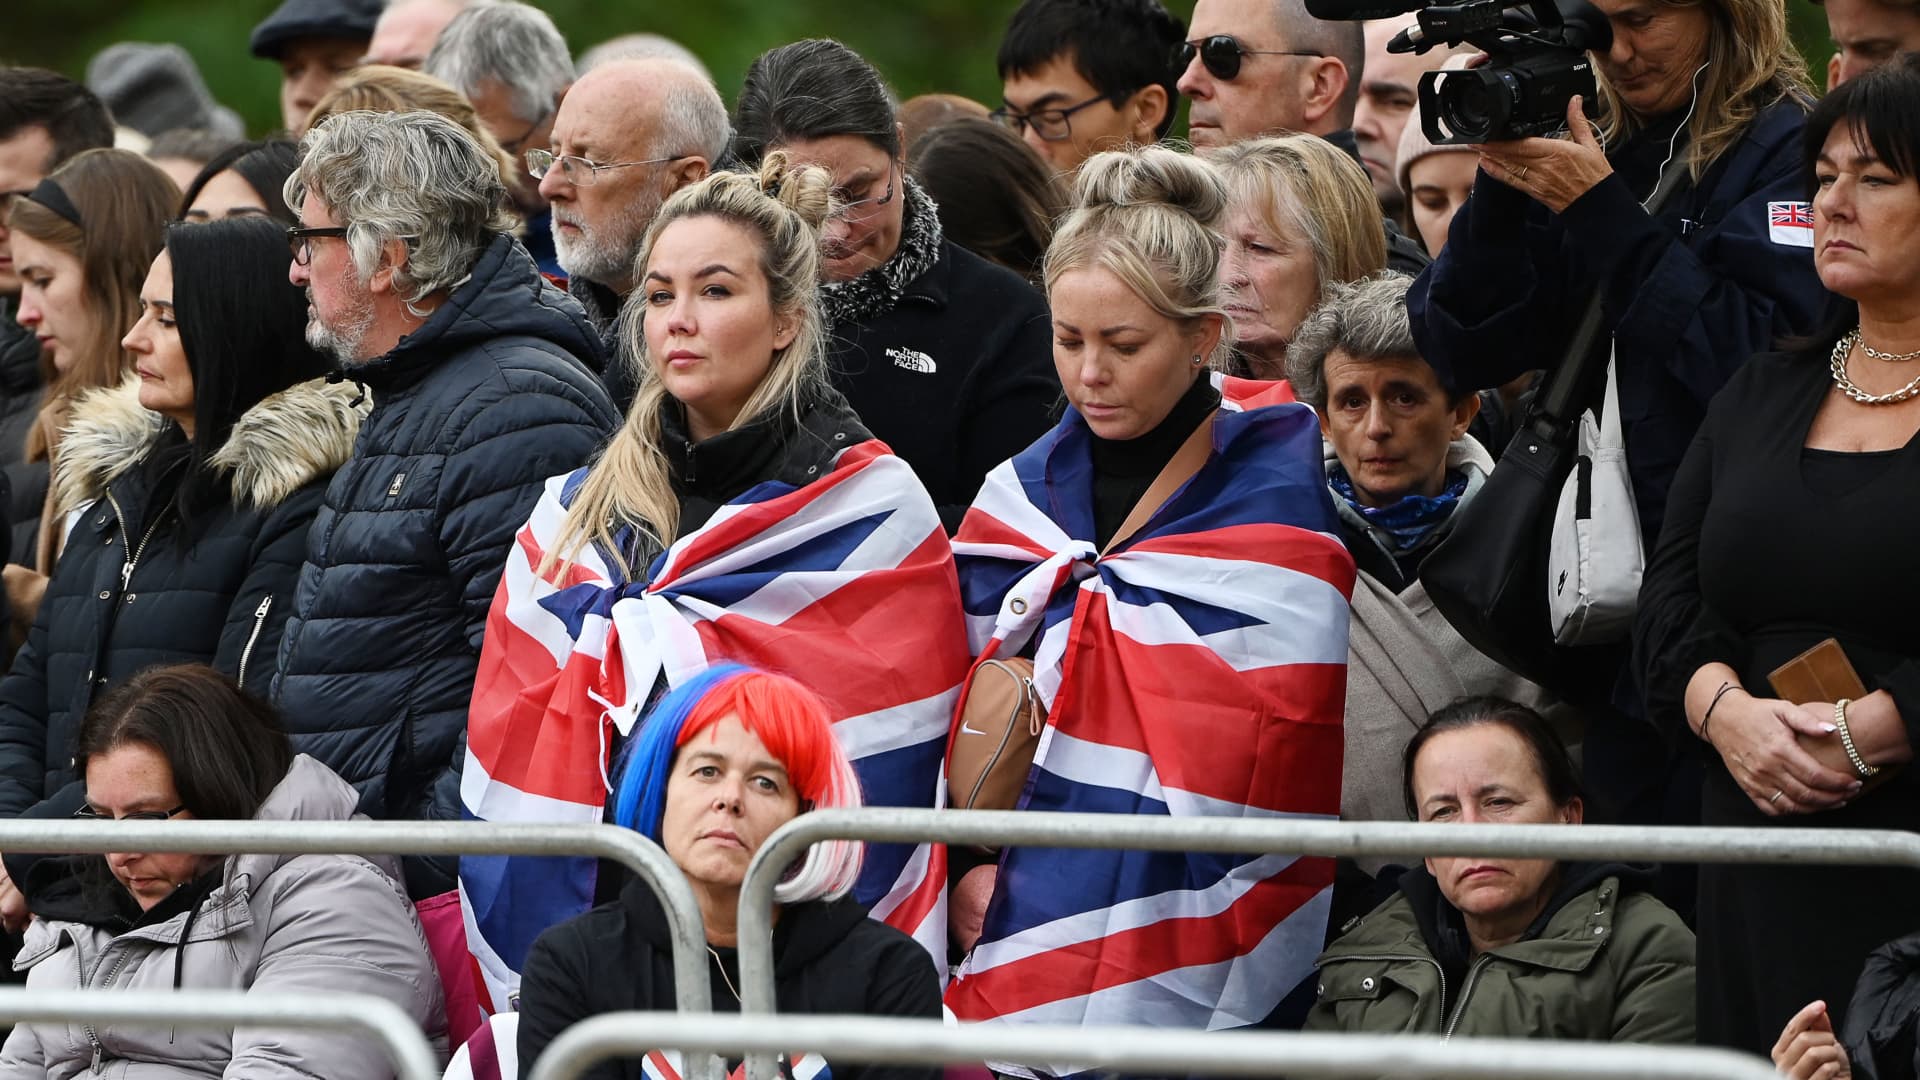 Members of the public wait for the passage of the coffin along the Procession Route in London on September 19, 2022, during the State Funeral Service of Britain's Queen Elizabeth II.